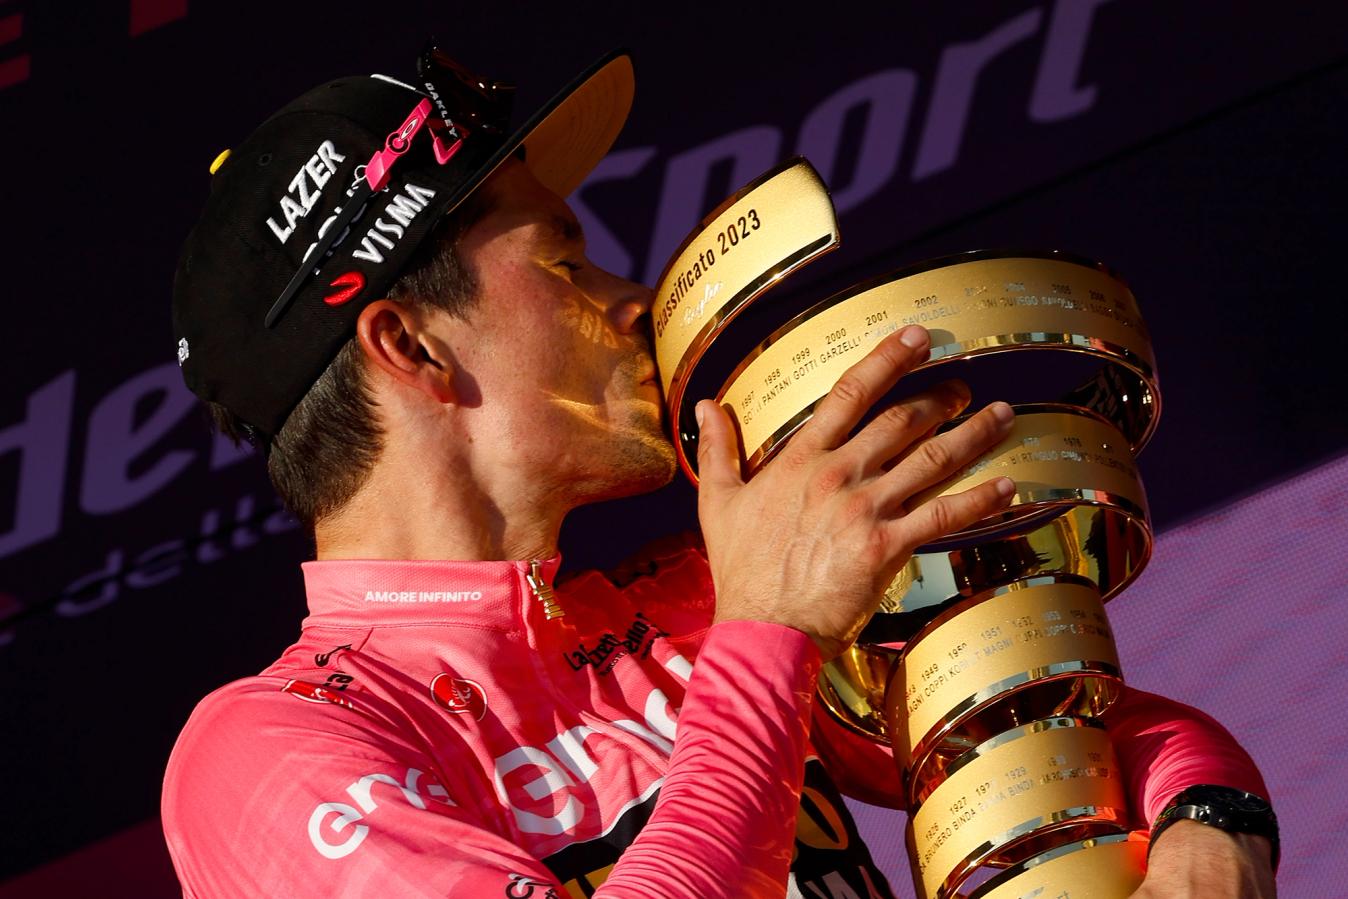 While the Vuelta has, typically, been the happiest of hunting grounds for Roglič, the 2023 Giro was a huge addition to his palmarès